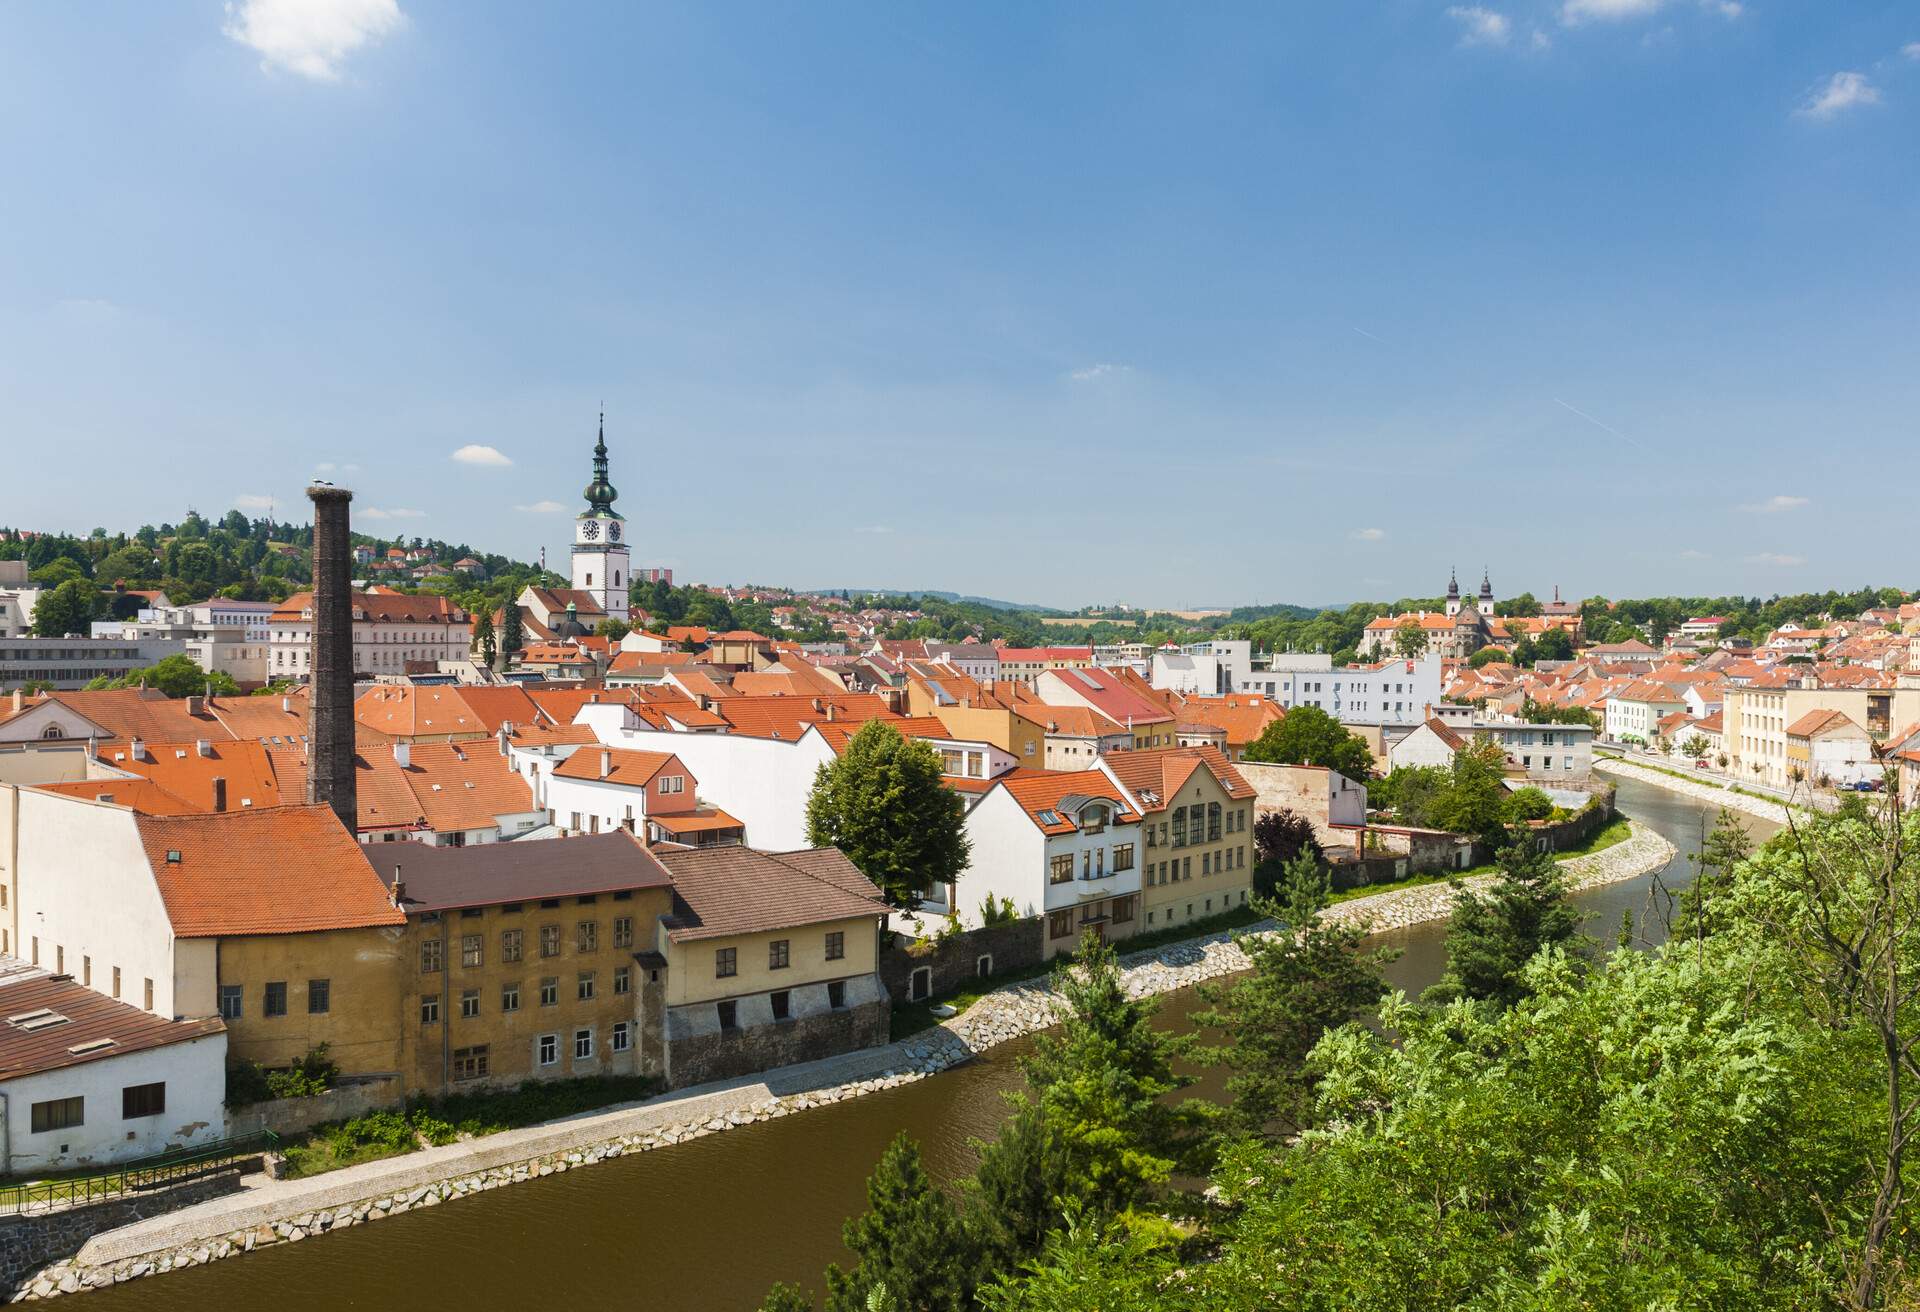 Town of Trebic located in Moravia in the Eastern Czech Republic. City Centre and river Jihlava seen from above